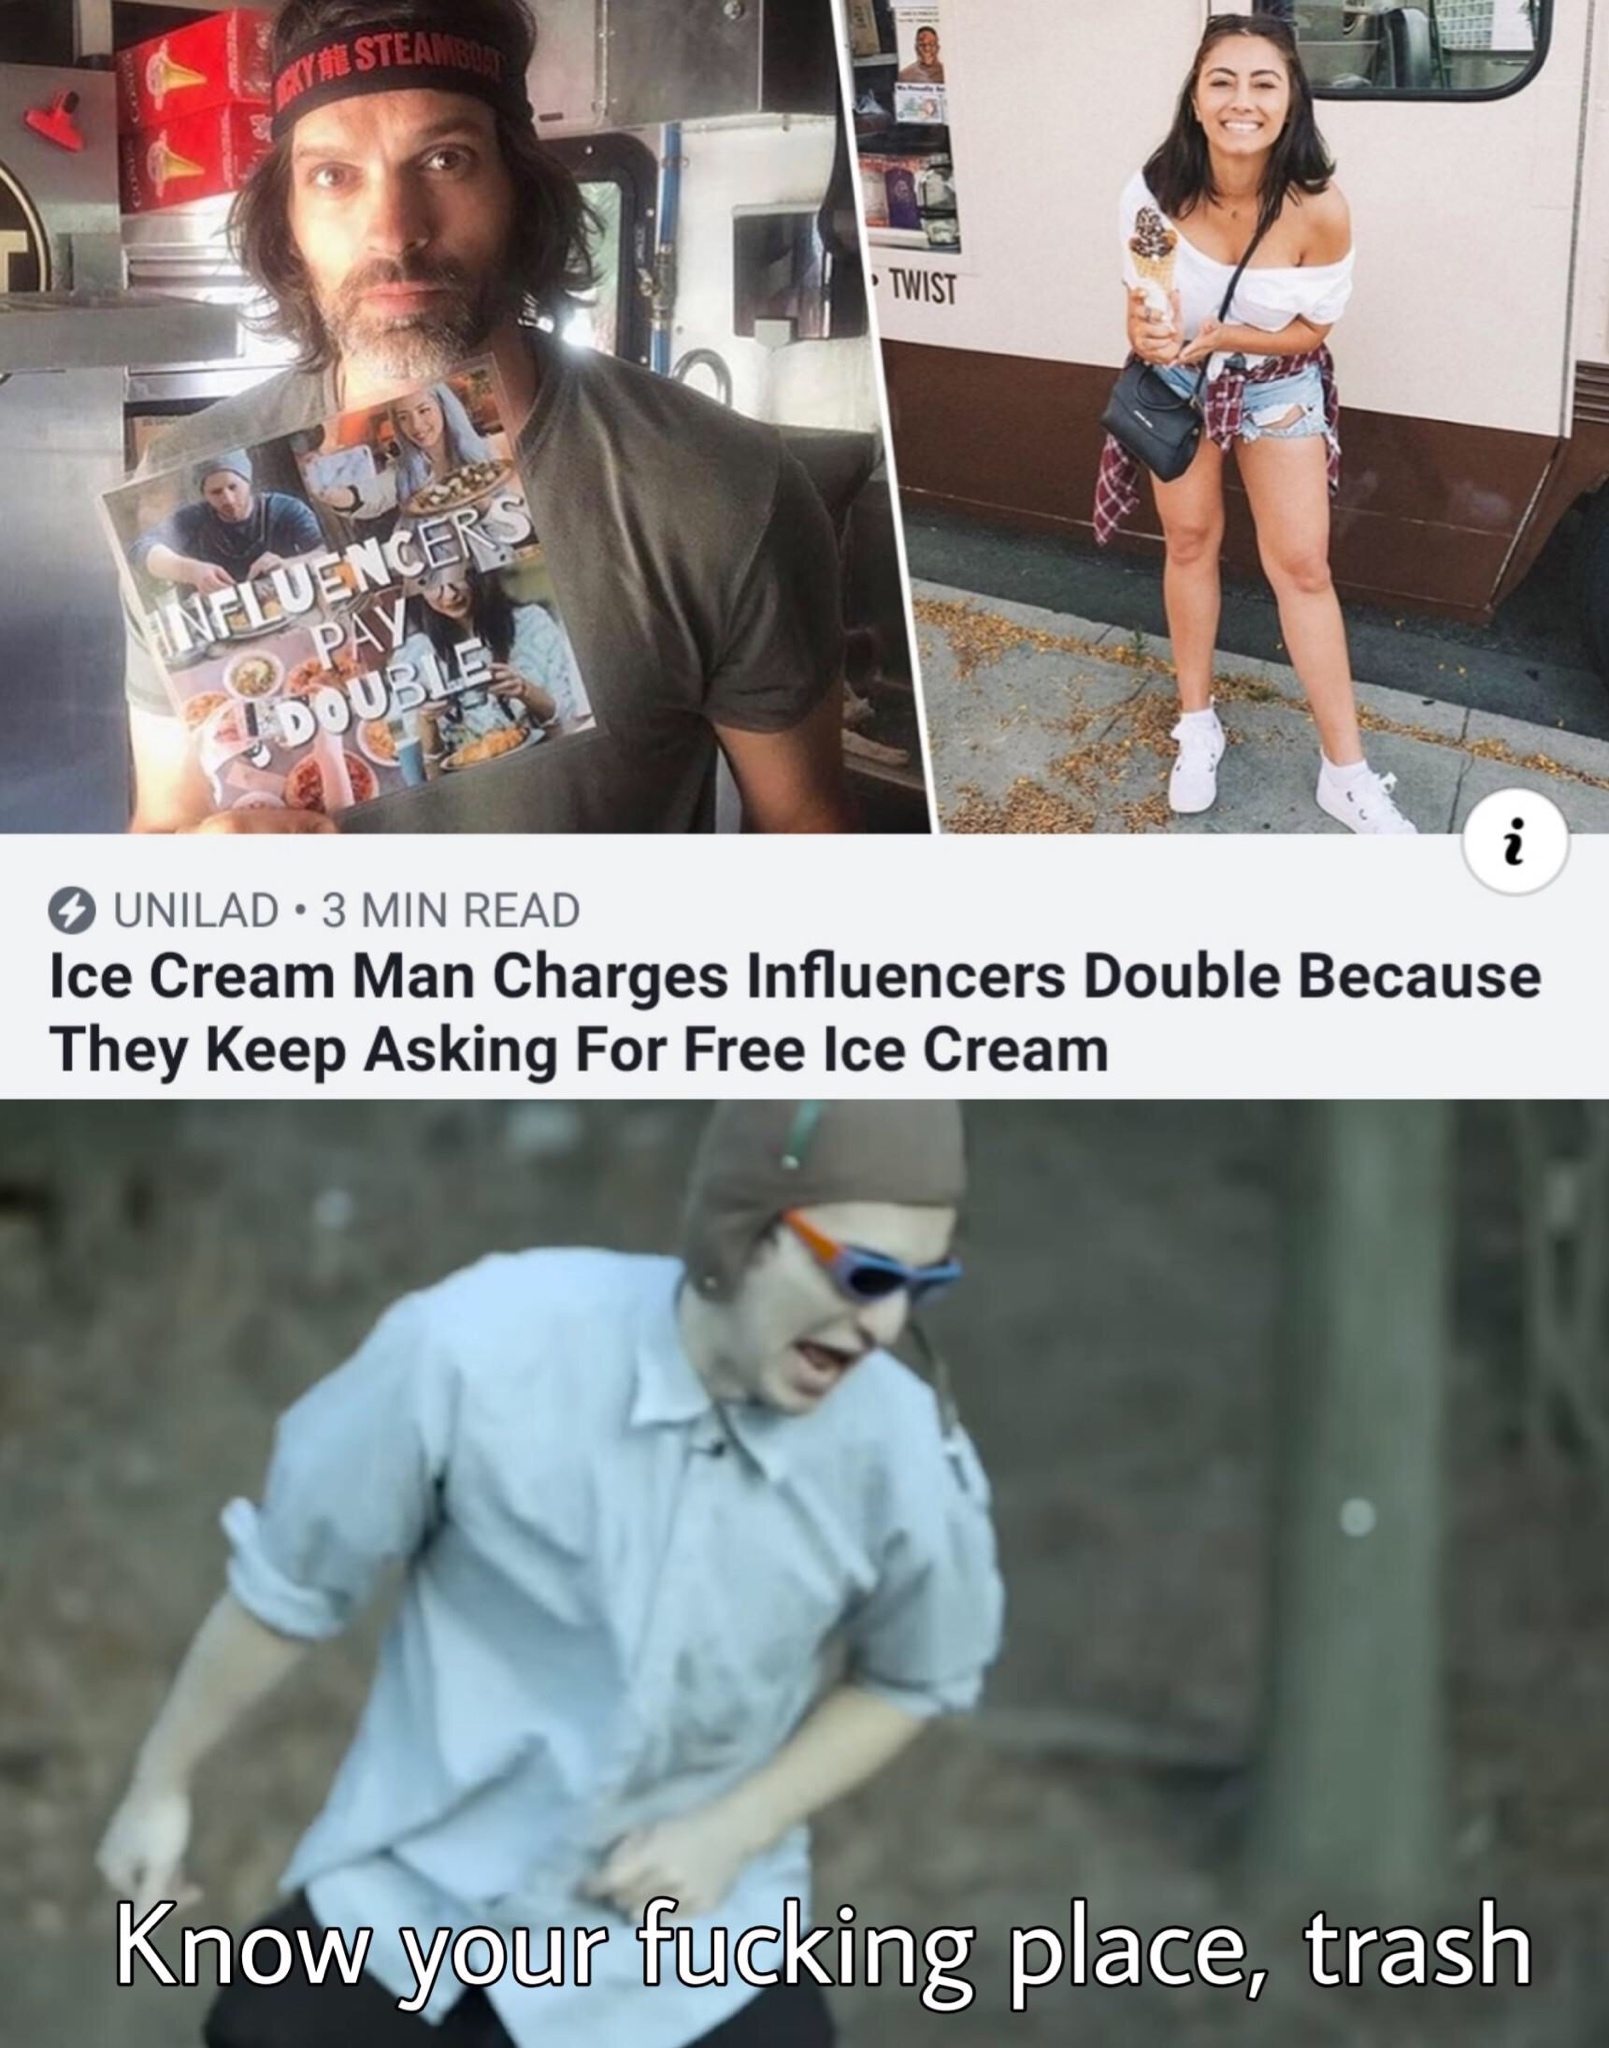 Ice cream van - Gasten Sfluencers Pay Double Unilad 3 Min Read Ice Cream Man Charges Influencers Double Because They keep Asking For Free Ice Cream Know your fucking place, trash